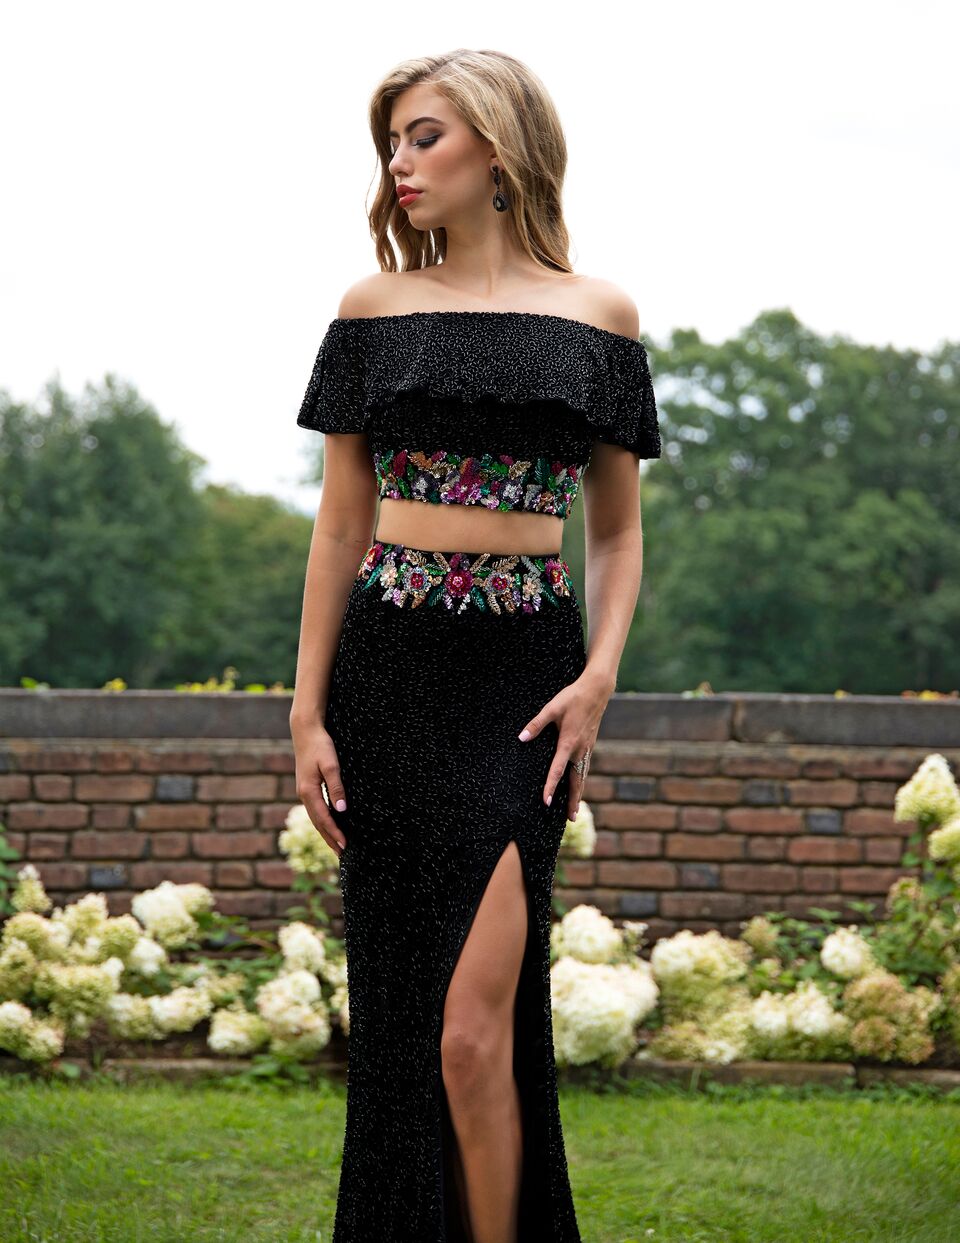 Primavera Couture 3215 Black Size 16 Prom Dress Pageant Gown  A two piece beautiful prom gown with off the shoulder boho beaded ruffle sleeves and a beaded floral design waistline with a side slit. 